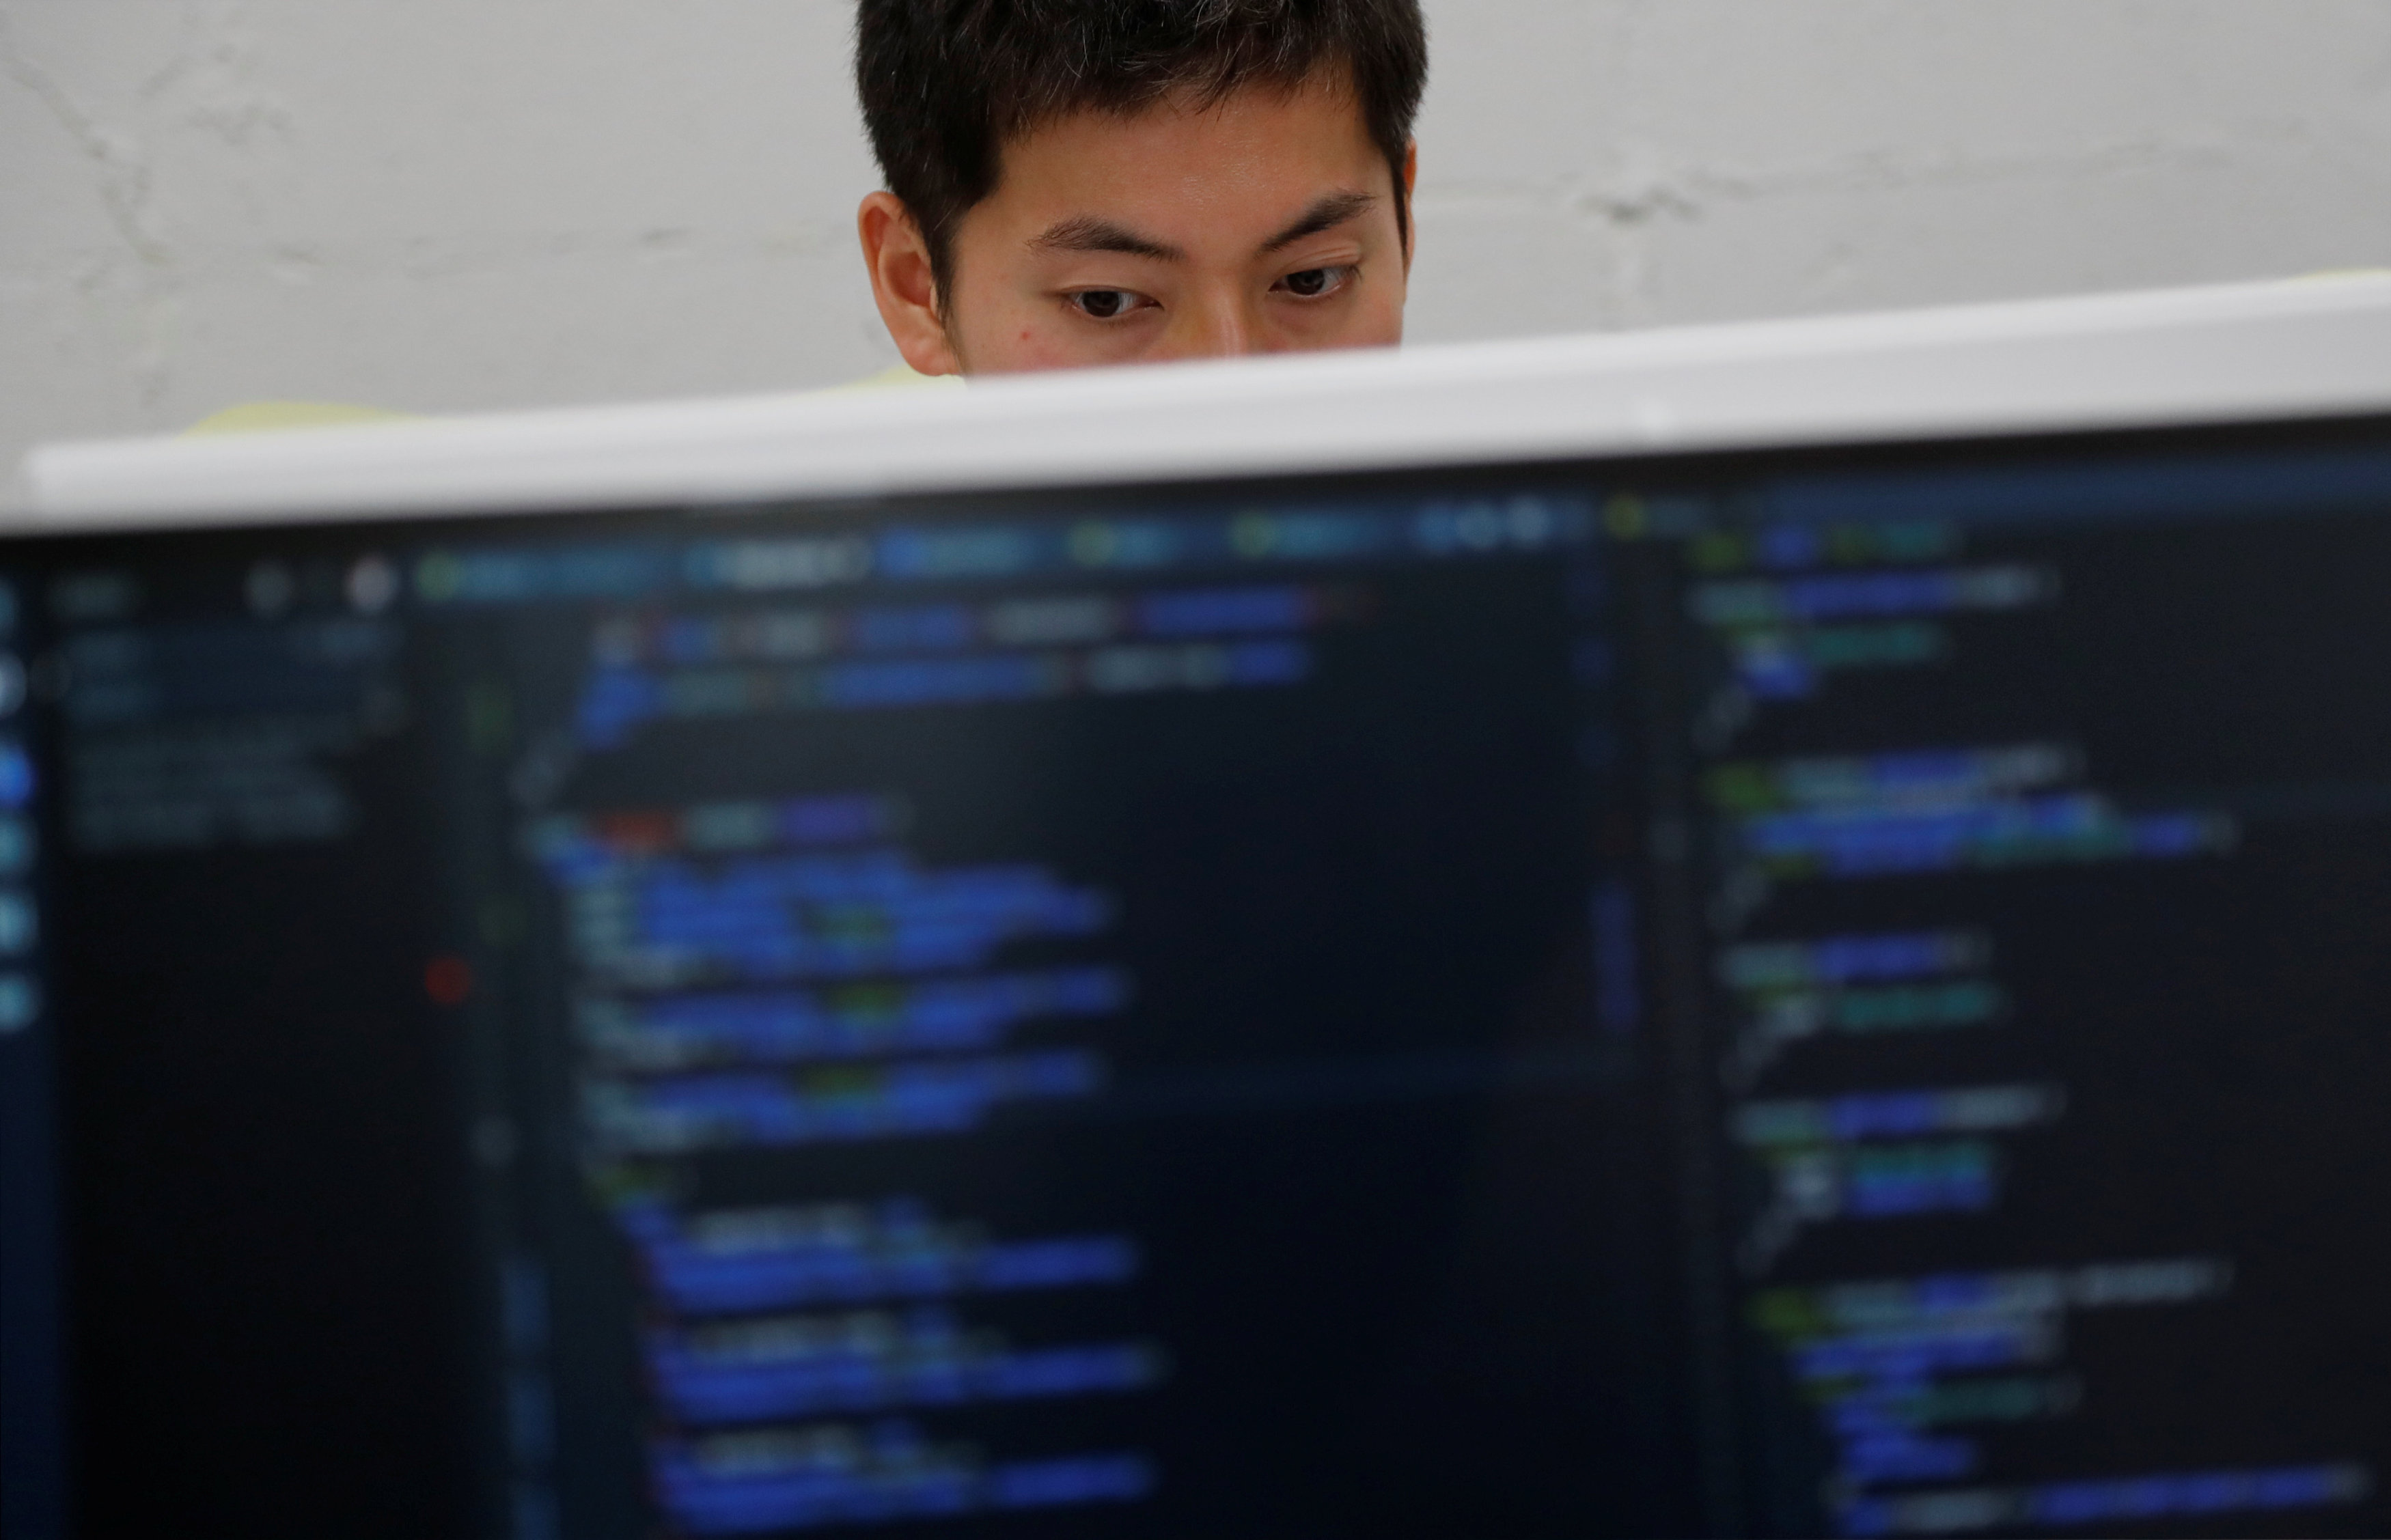 Silicon Valley-style coding boot camp seeks to reset Japan Inc